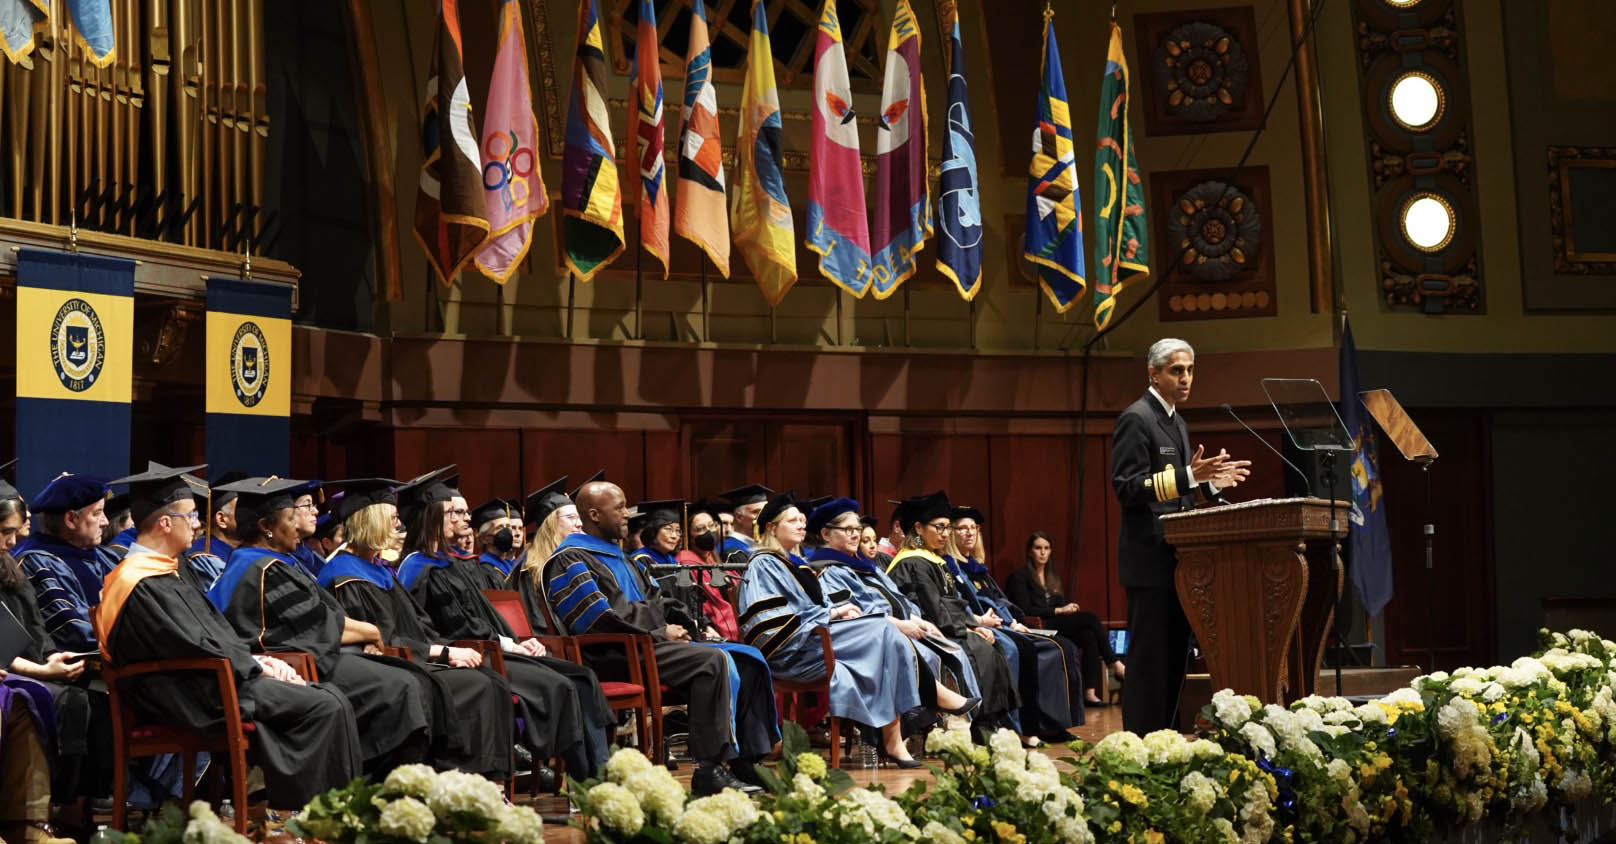 Dr. Vivek H. Murthy, the US Surgeon General, addressed the University of Michigan School of Public Health graduating Class of 2023 during commencement April 27 at Hill Auditorium. “The world needs you more than ever,” Murthy told the graduates.